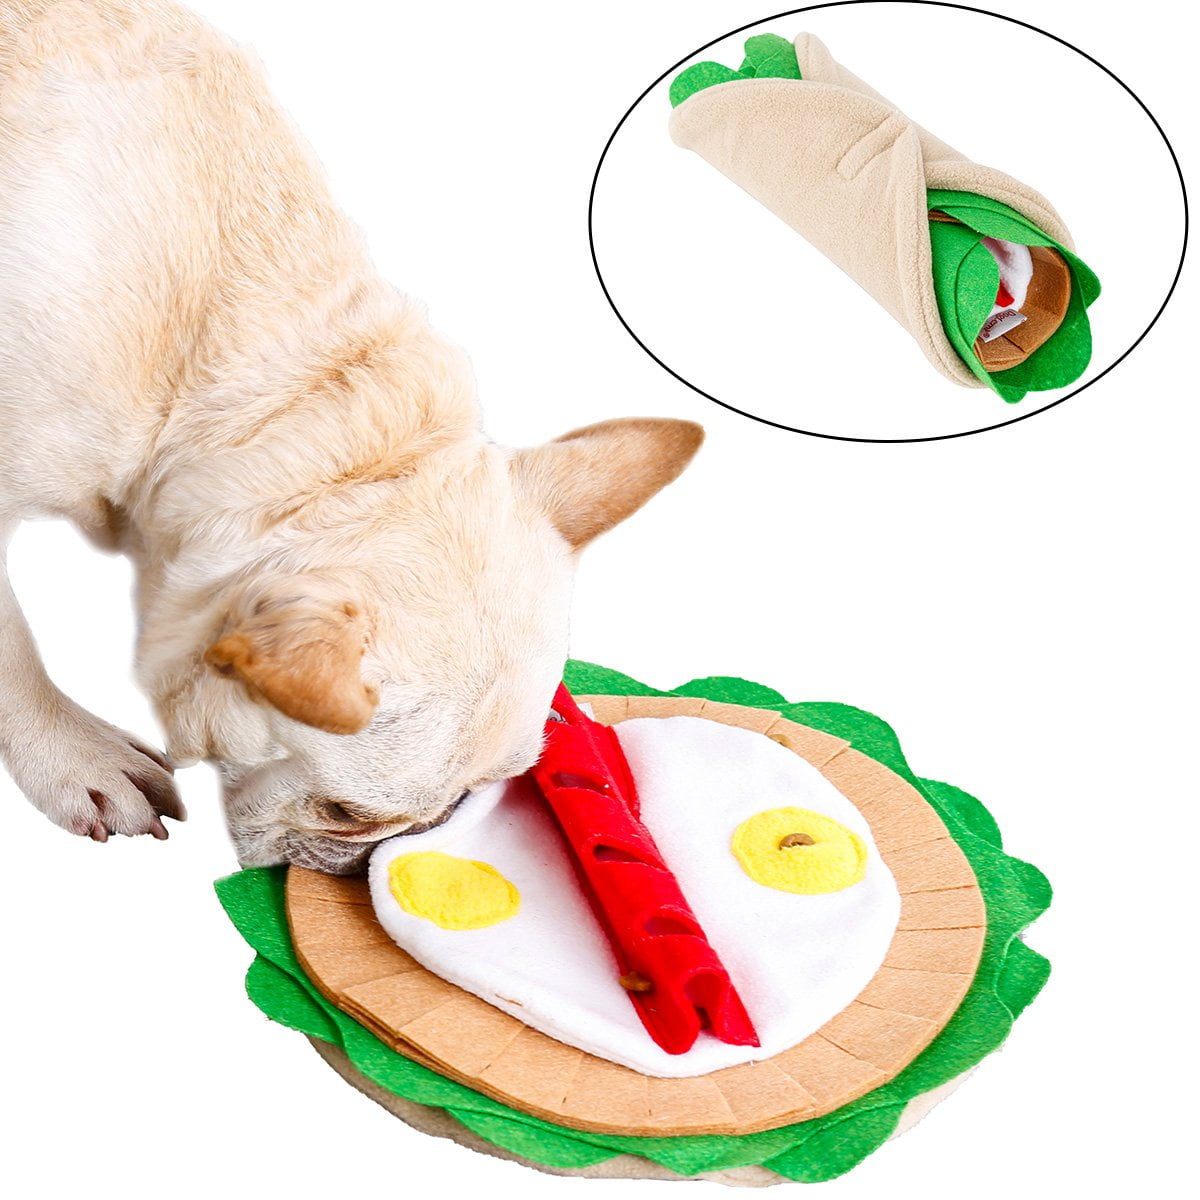 Paw 5 Dog Snuffle Mat for Dogs Small Dog Toys Interactive, Boredom &  Anxiety Premium Feeding Mat for Slow Eating & Smell Training, Dog Brain Toy